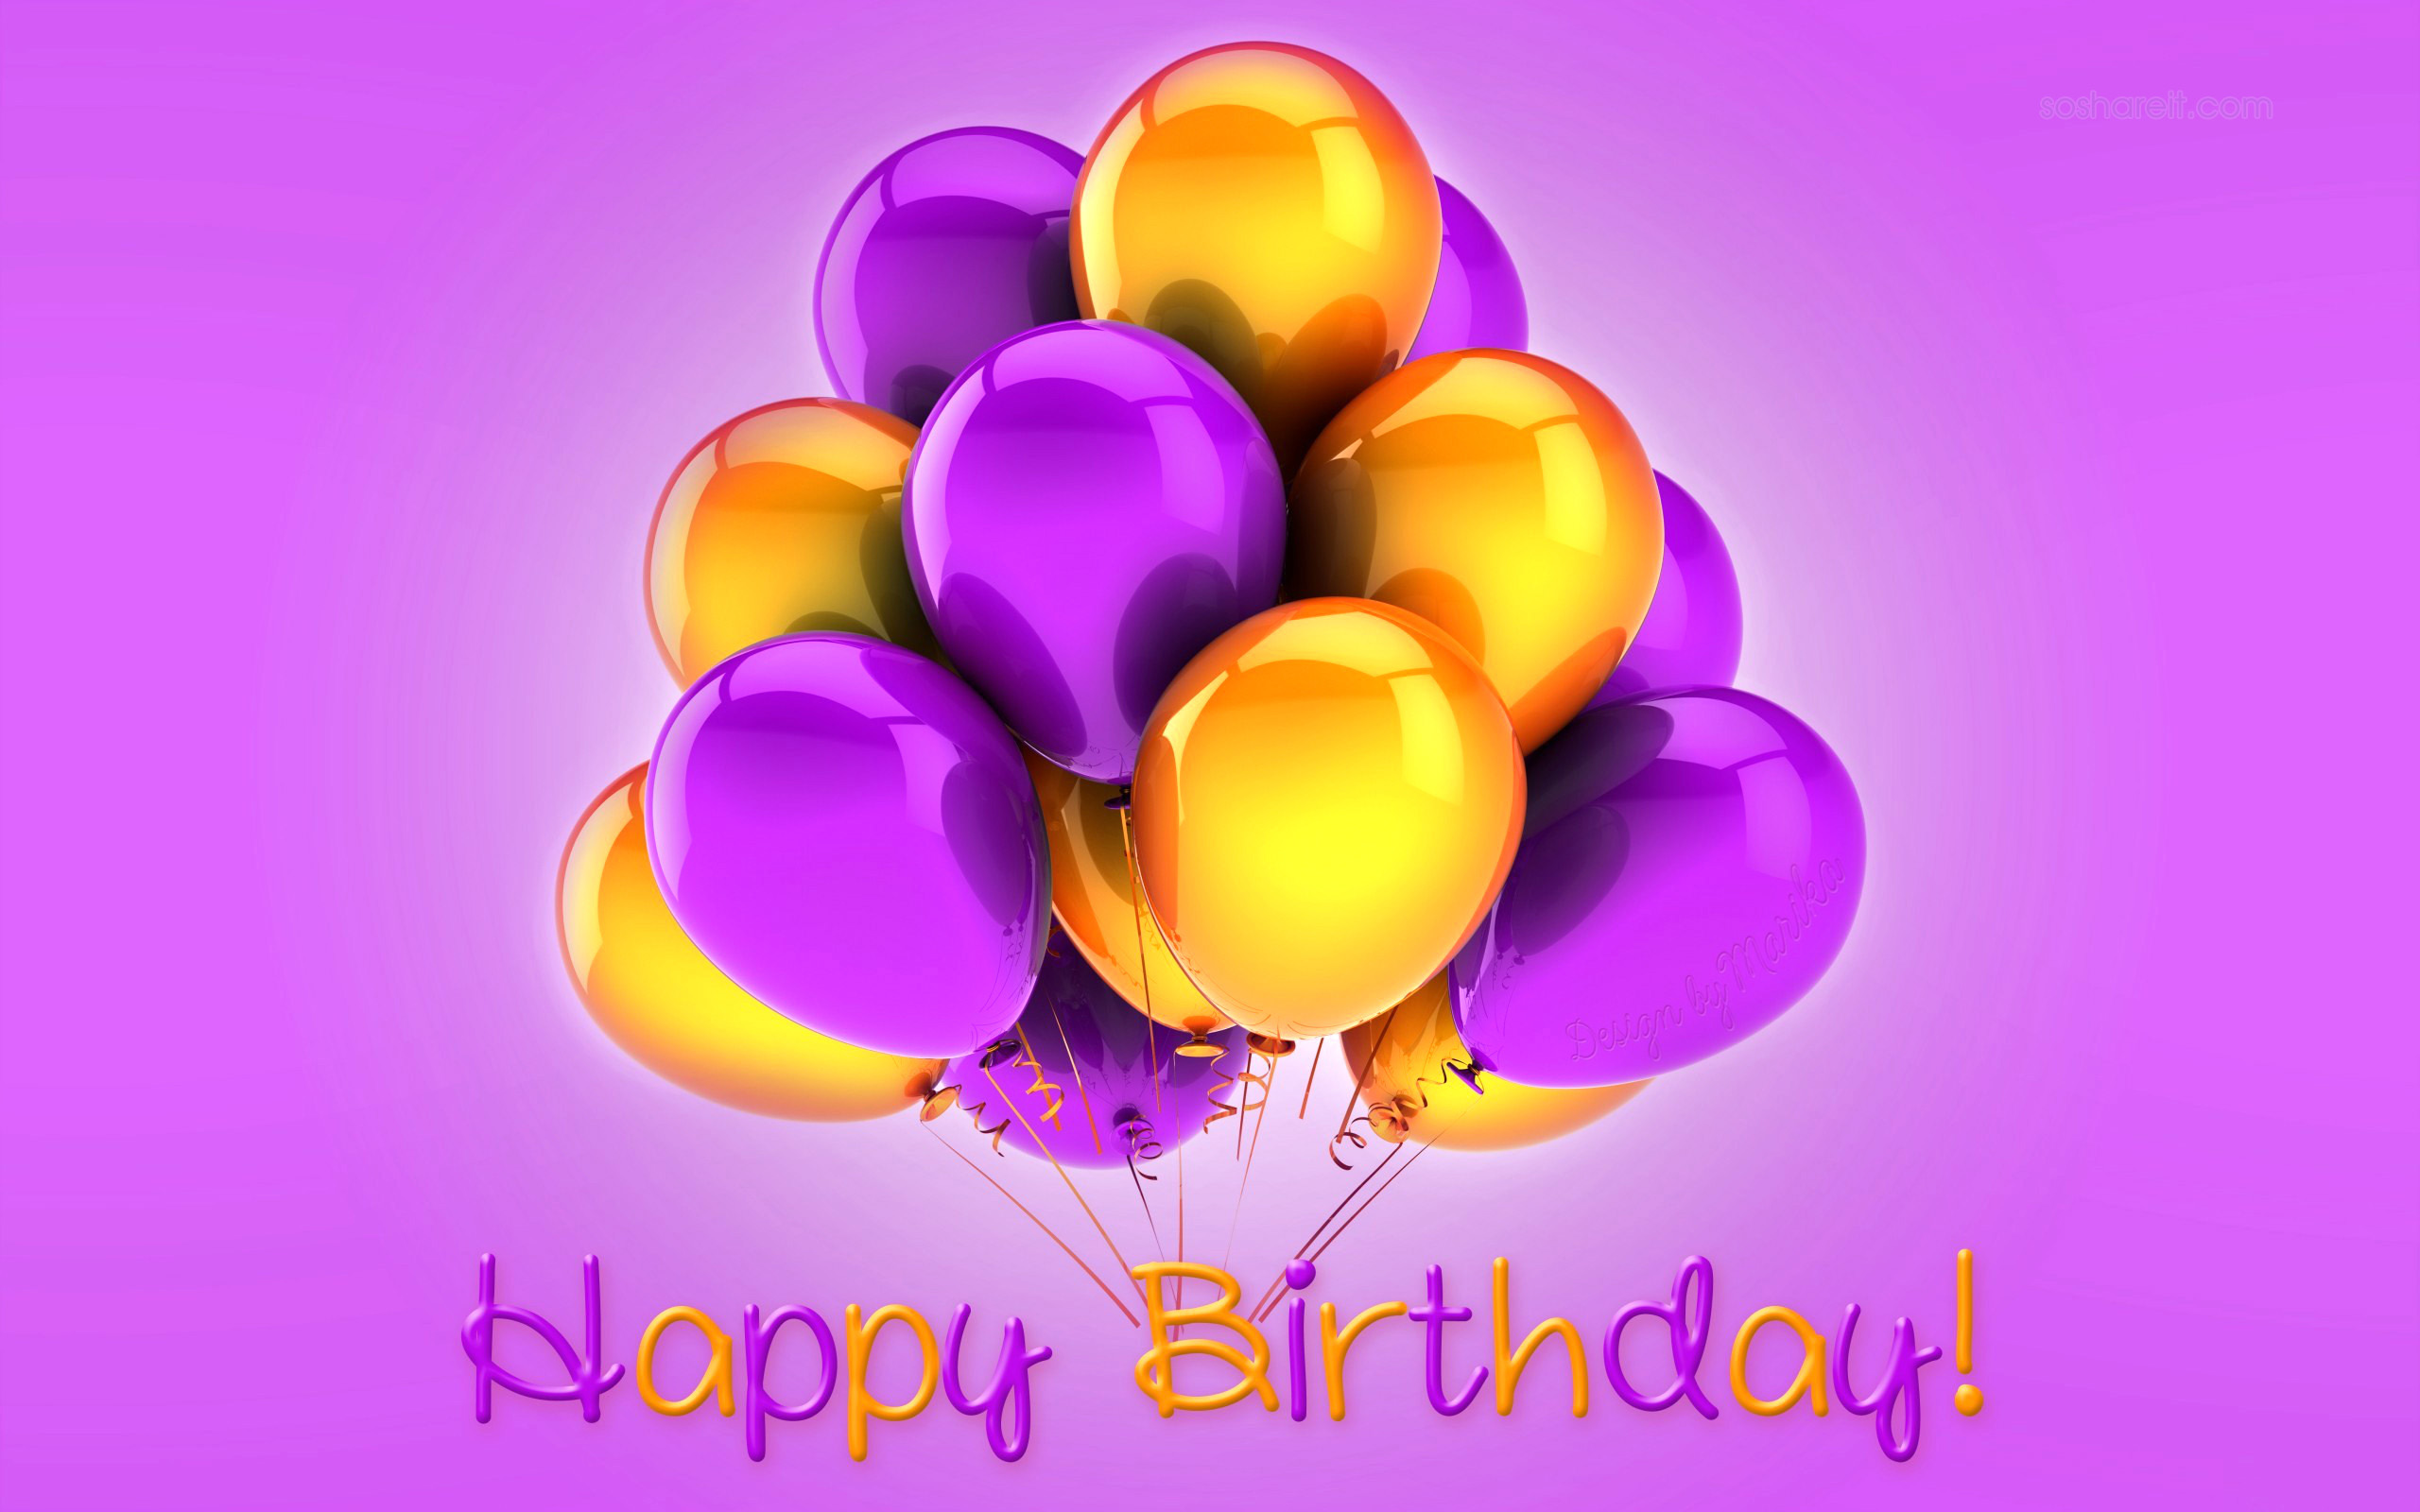 Happy Birthday Balloons Party Theme HD Images.